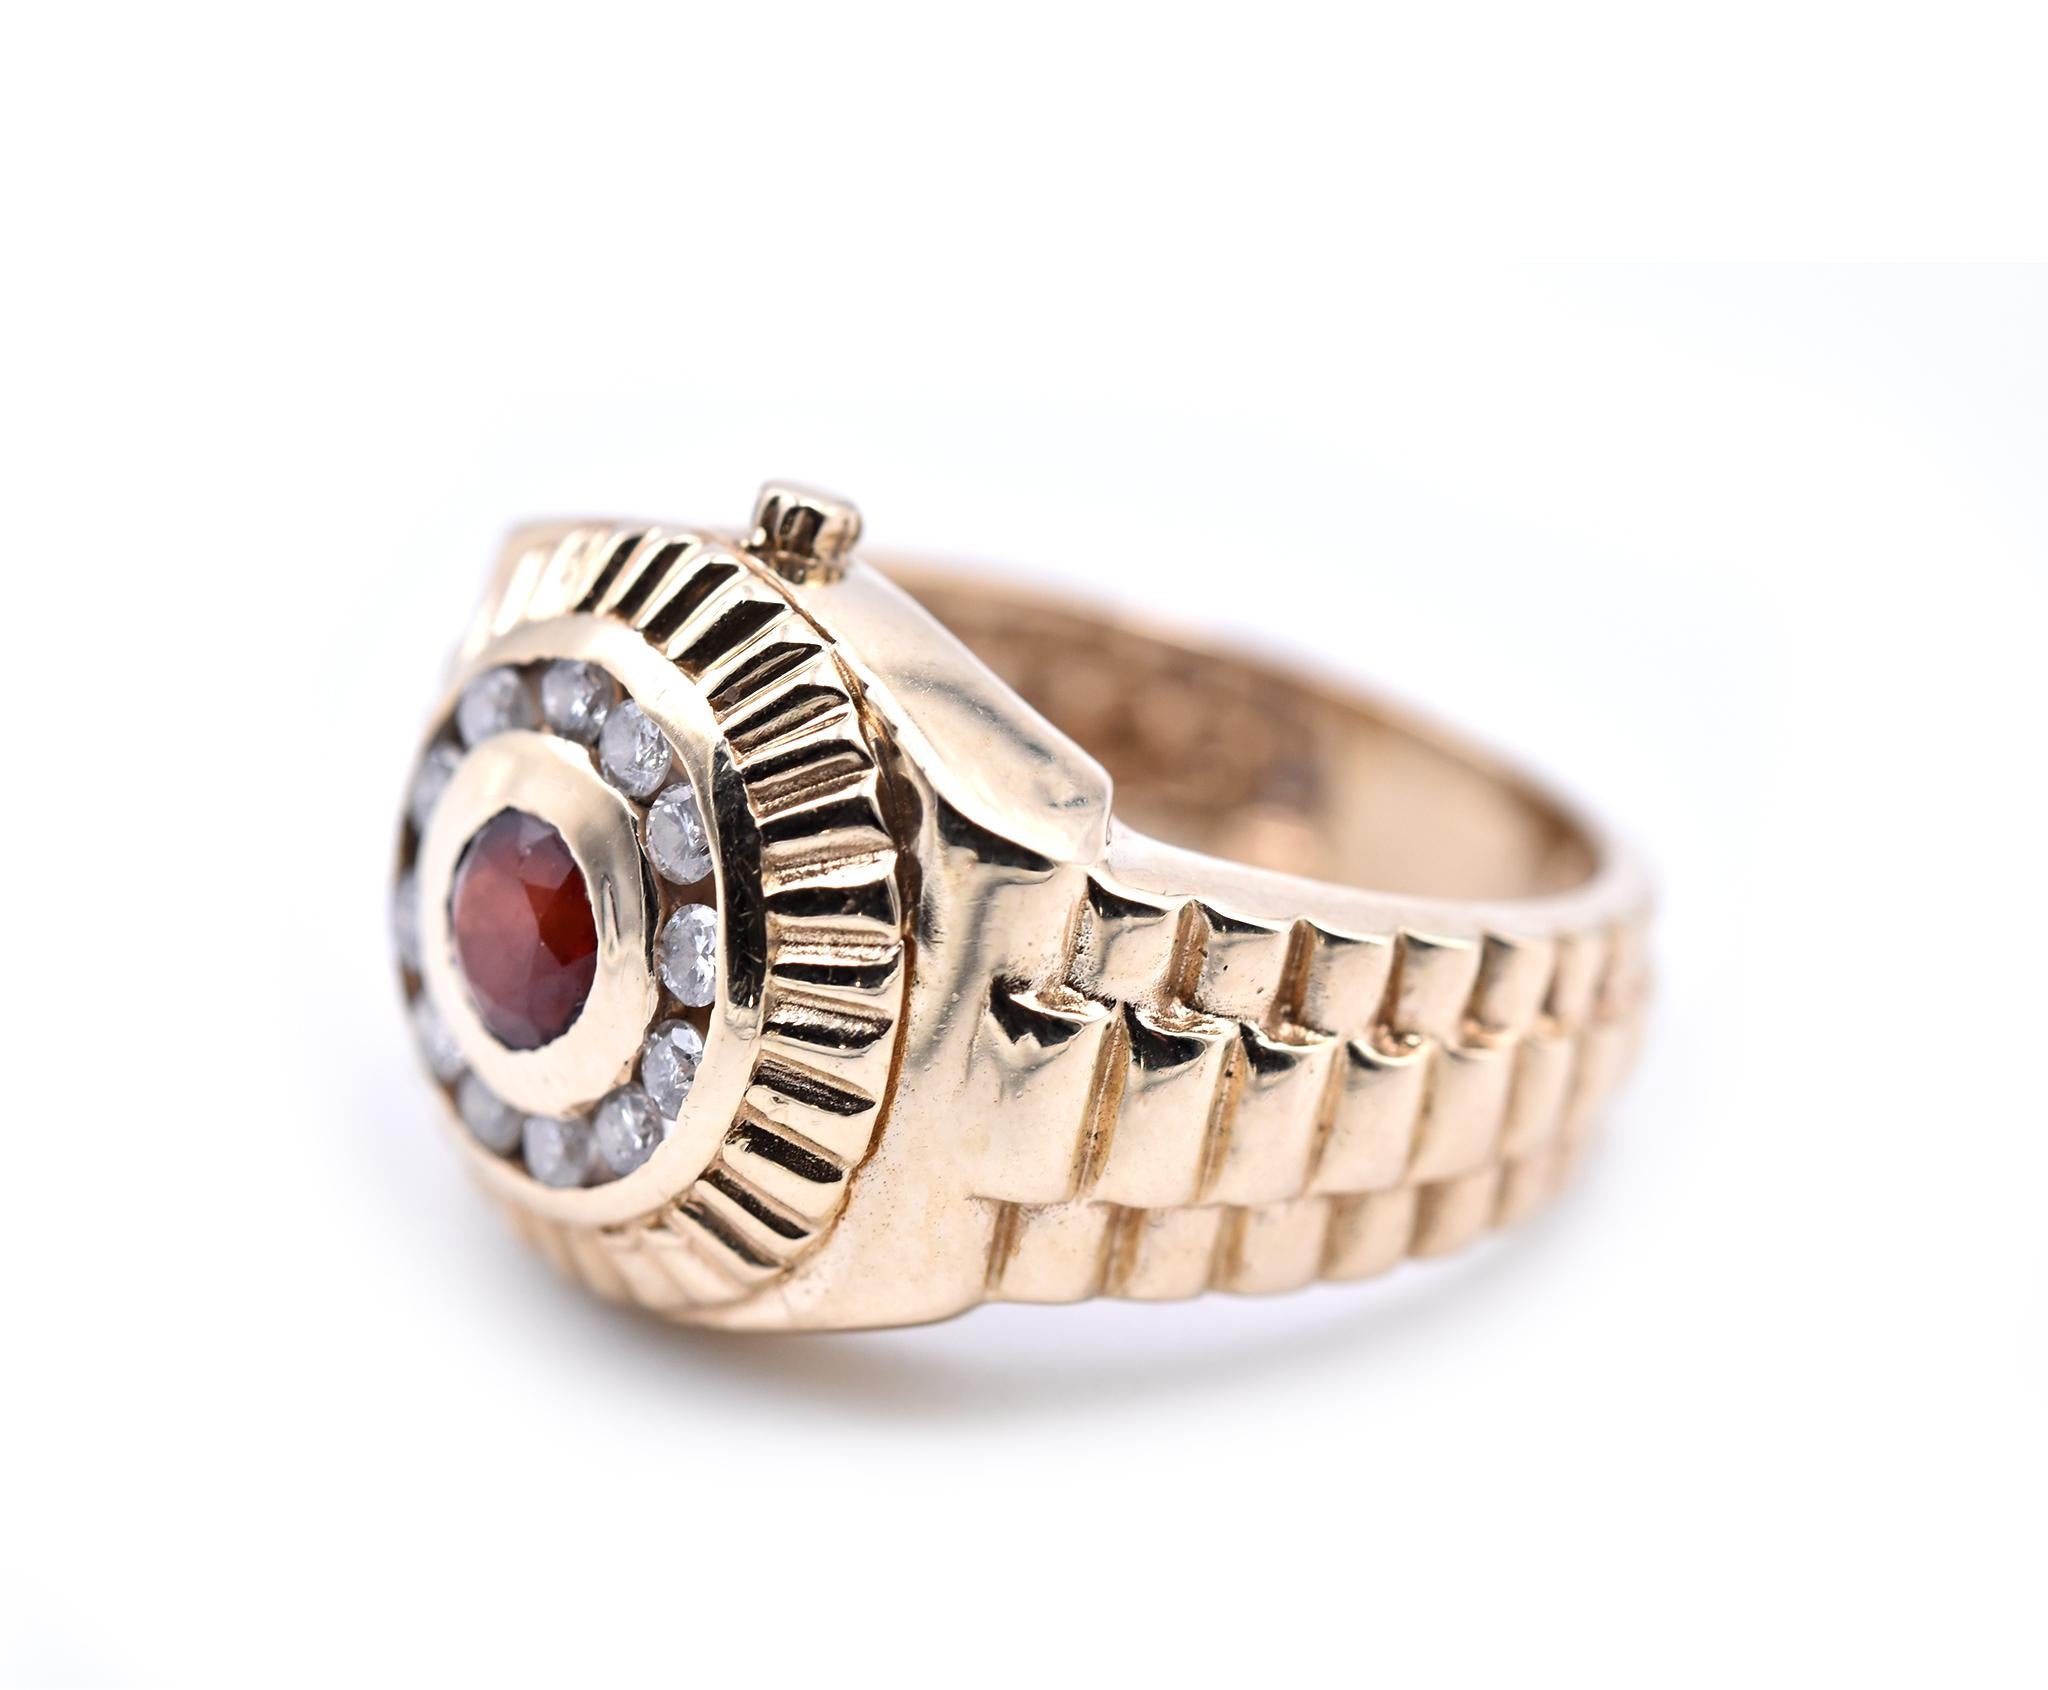 Designer: custom design
Material: 14k yellow gold
Center Stone: 1 Ruby = 0.25ct
Diamonds: 12d = 0.25cttw
Color: G
Clarity: SI1
Dimensions: ring measures 23.38mm in height and 21.01mm in width
Ring Size: 5 1/2 (please allow two additional shipping